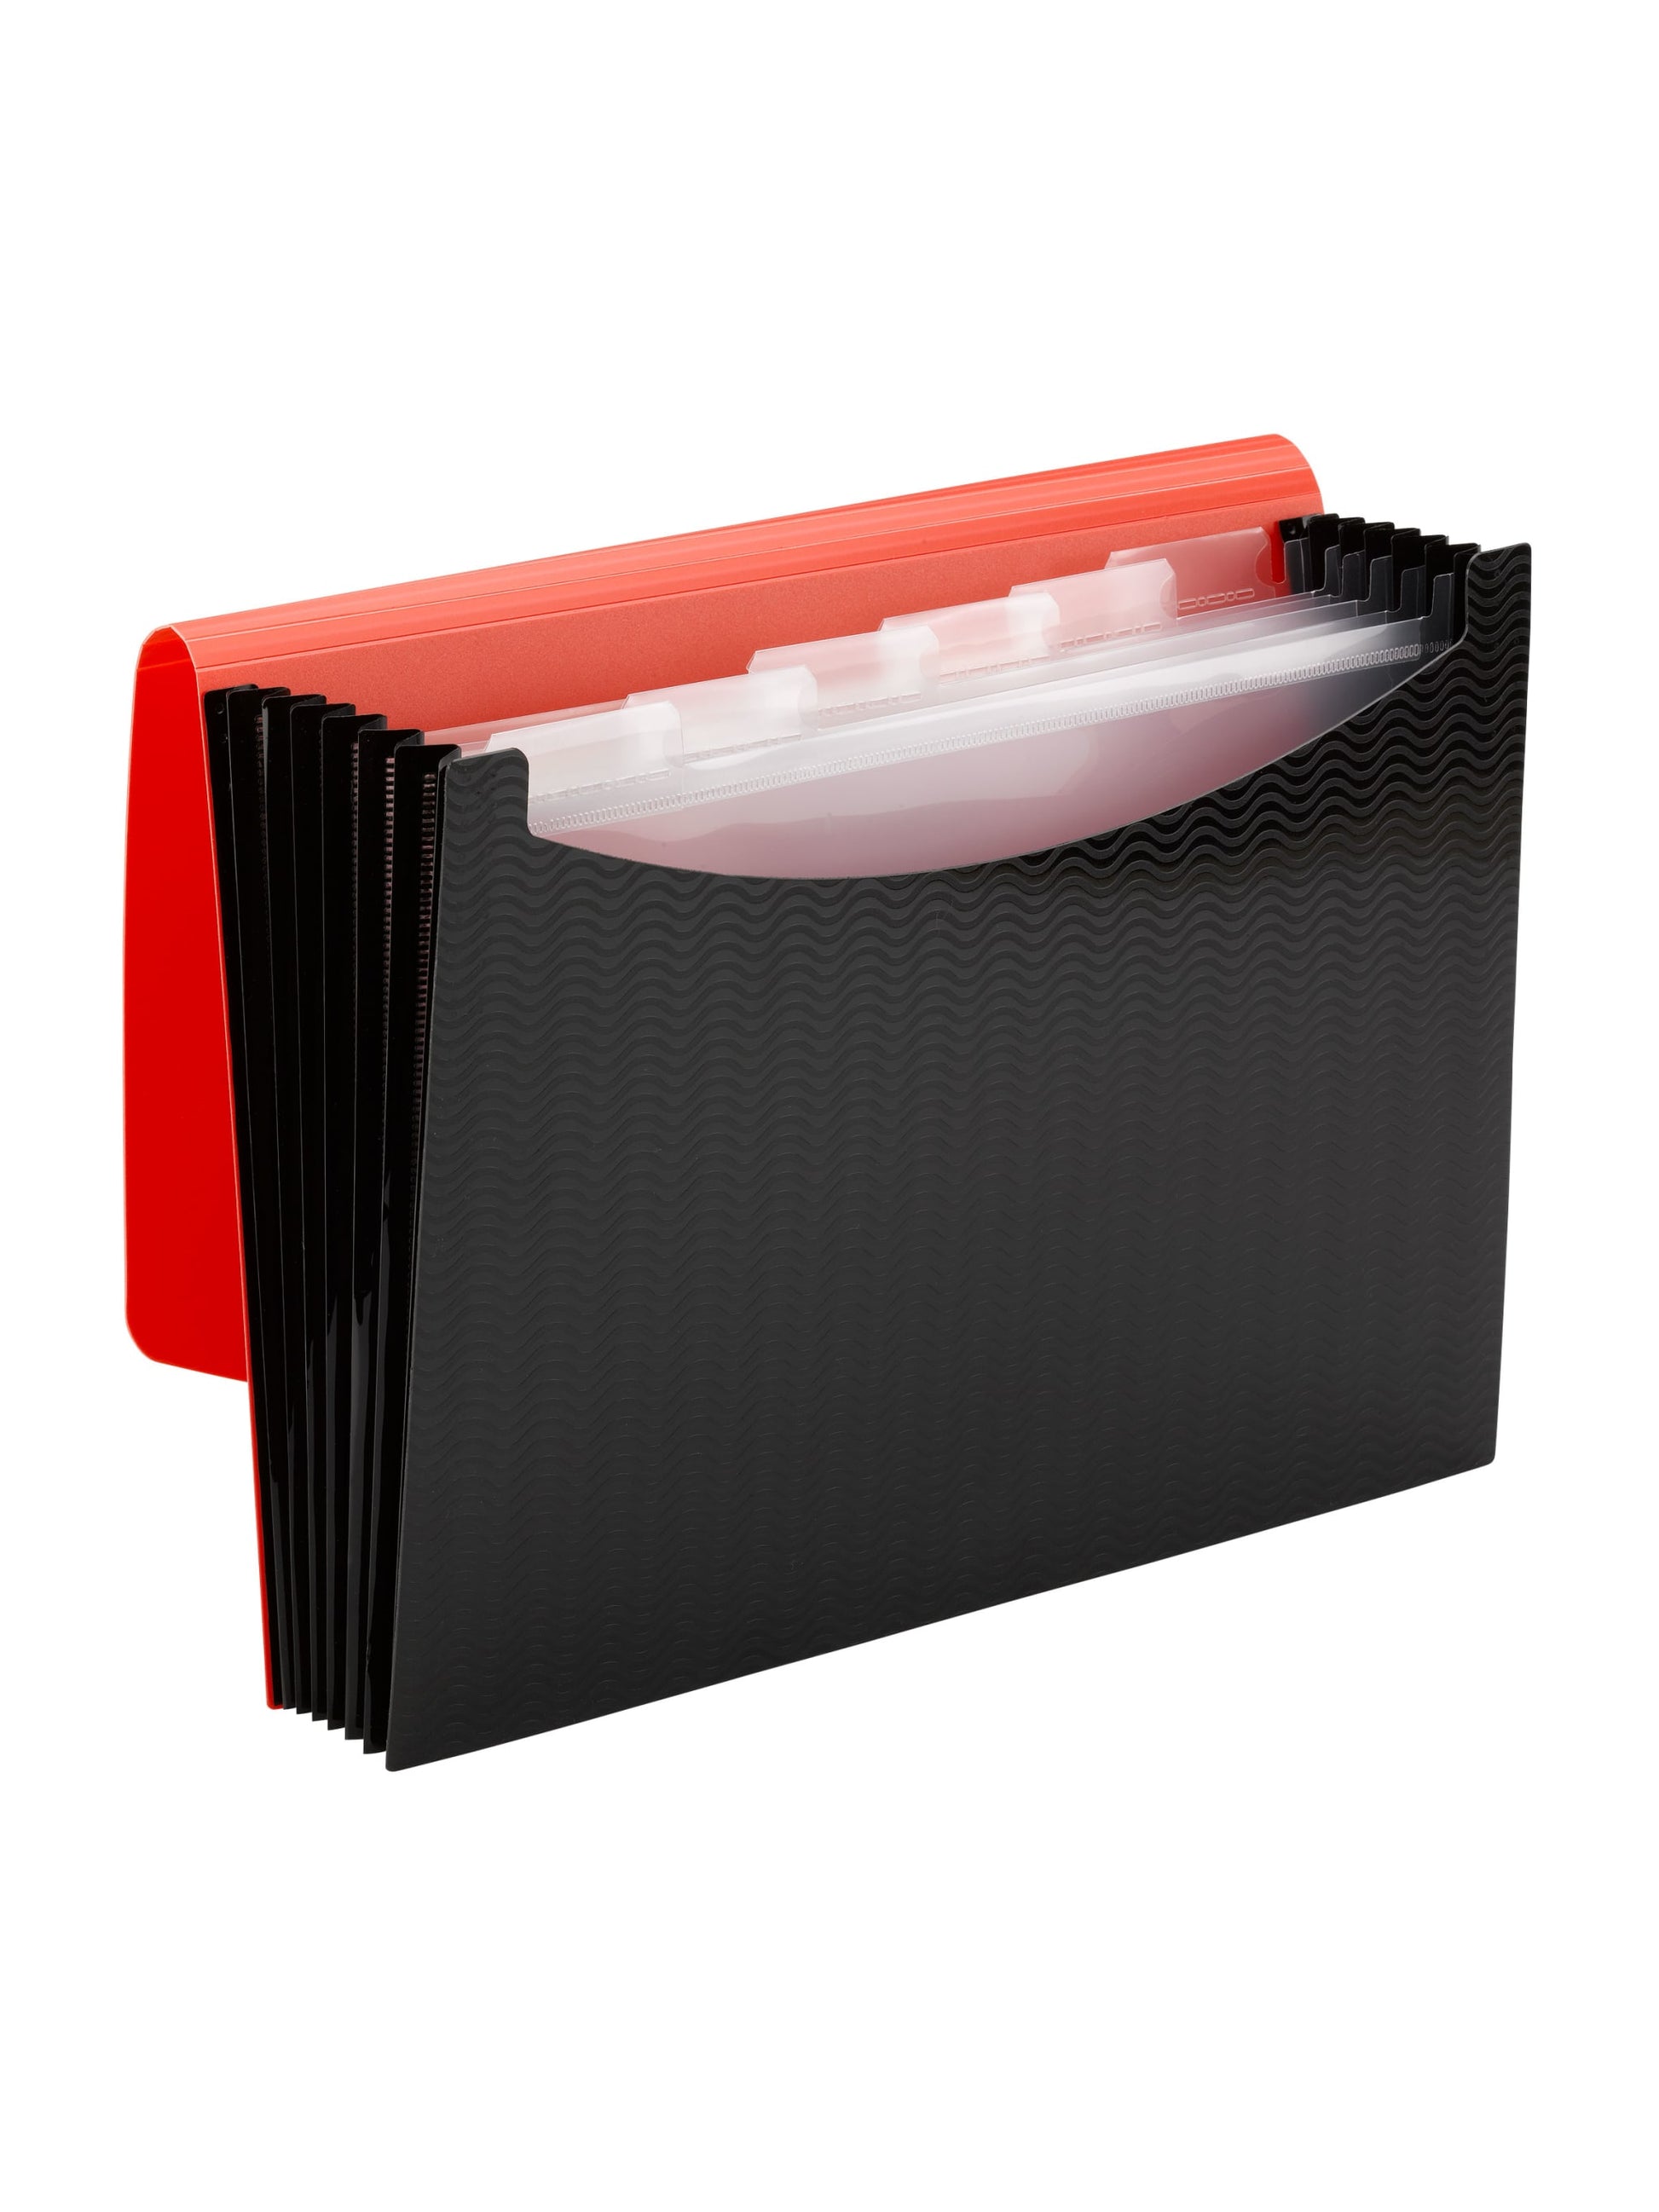 Poly Expanding Files with Flap, 6 Pockets, Wave Pattern, Red Color, Letter Size, Set of 1, 086486708845